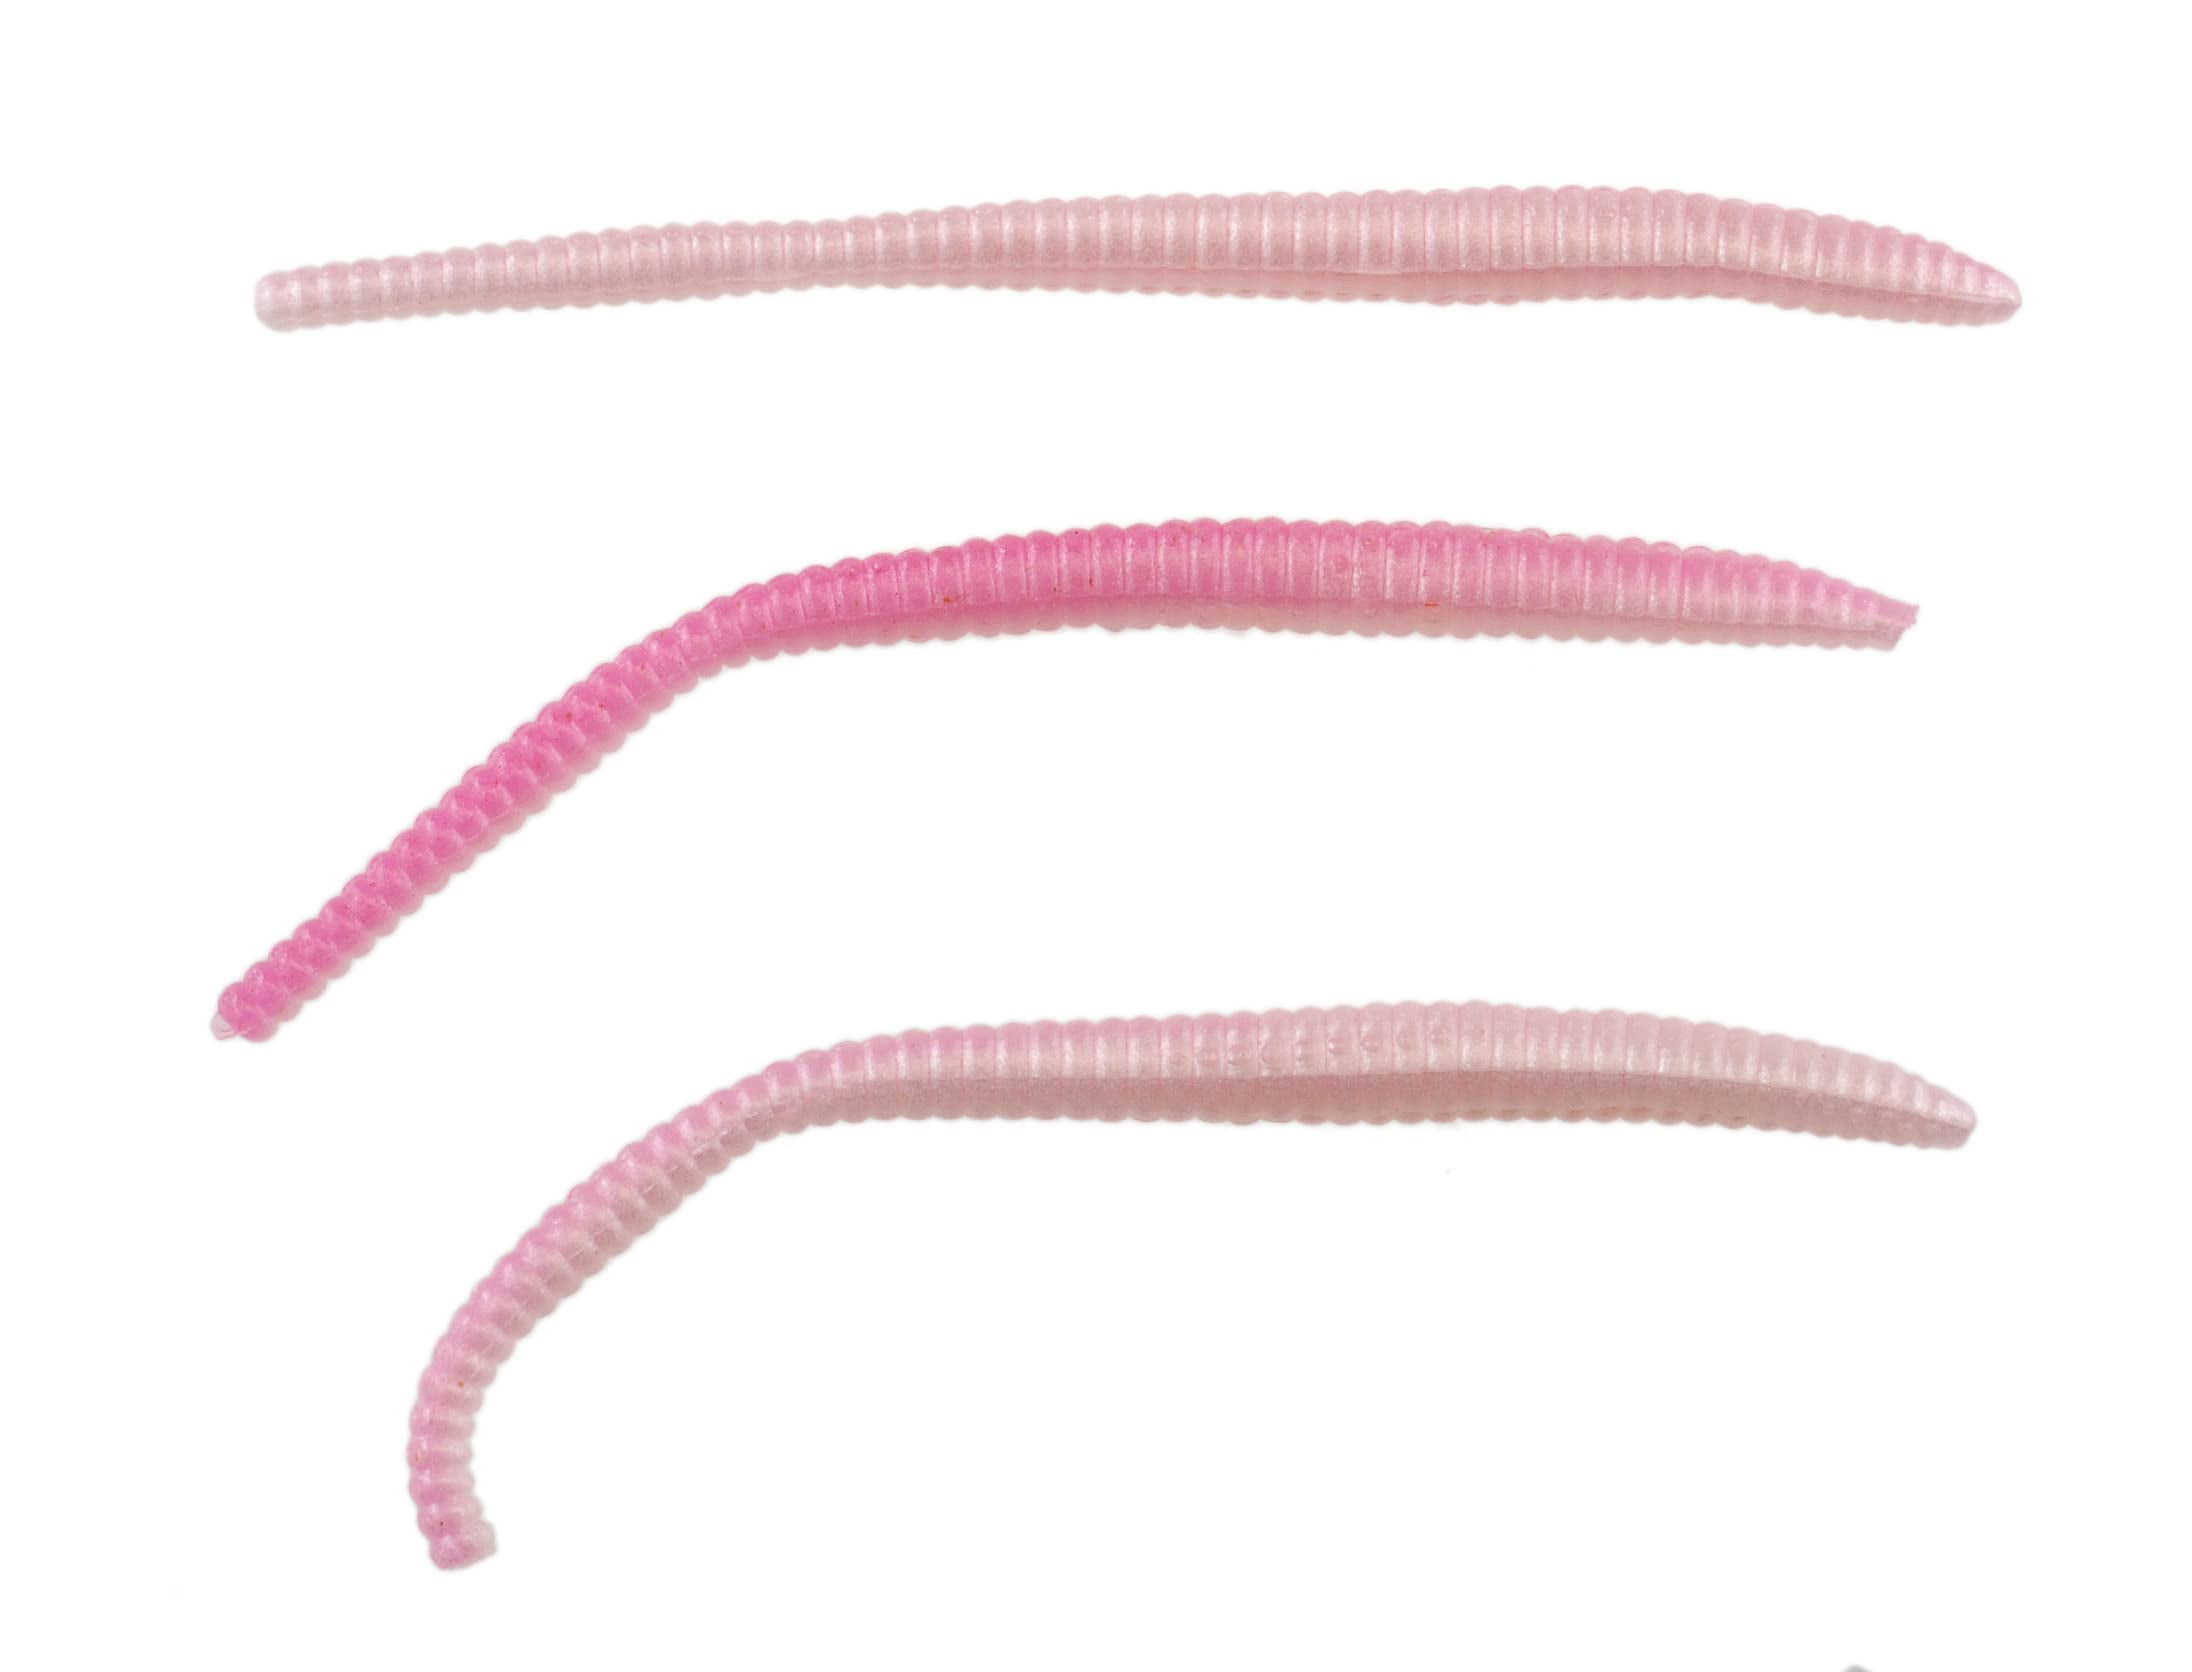 Berkley PowerBait Power Floating Trout Worm Pink Shad, 3 (15 Count)